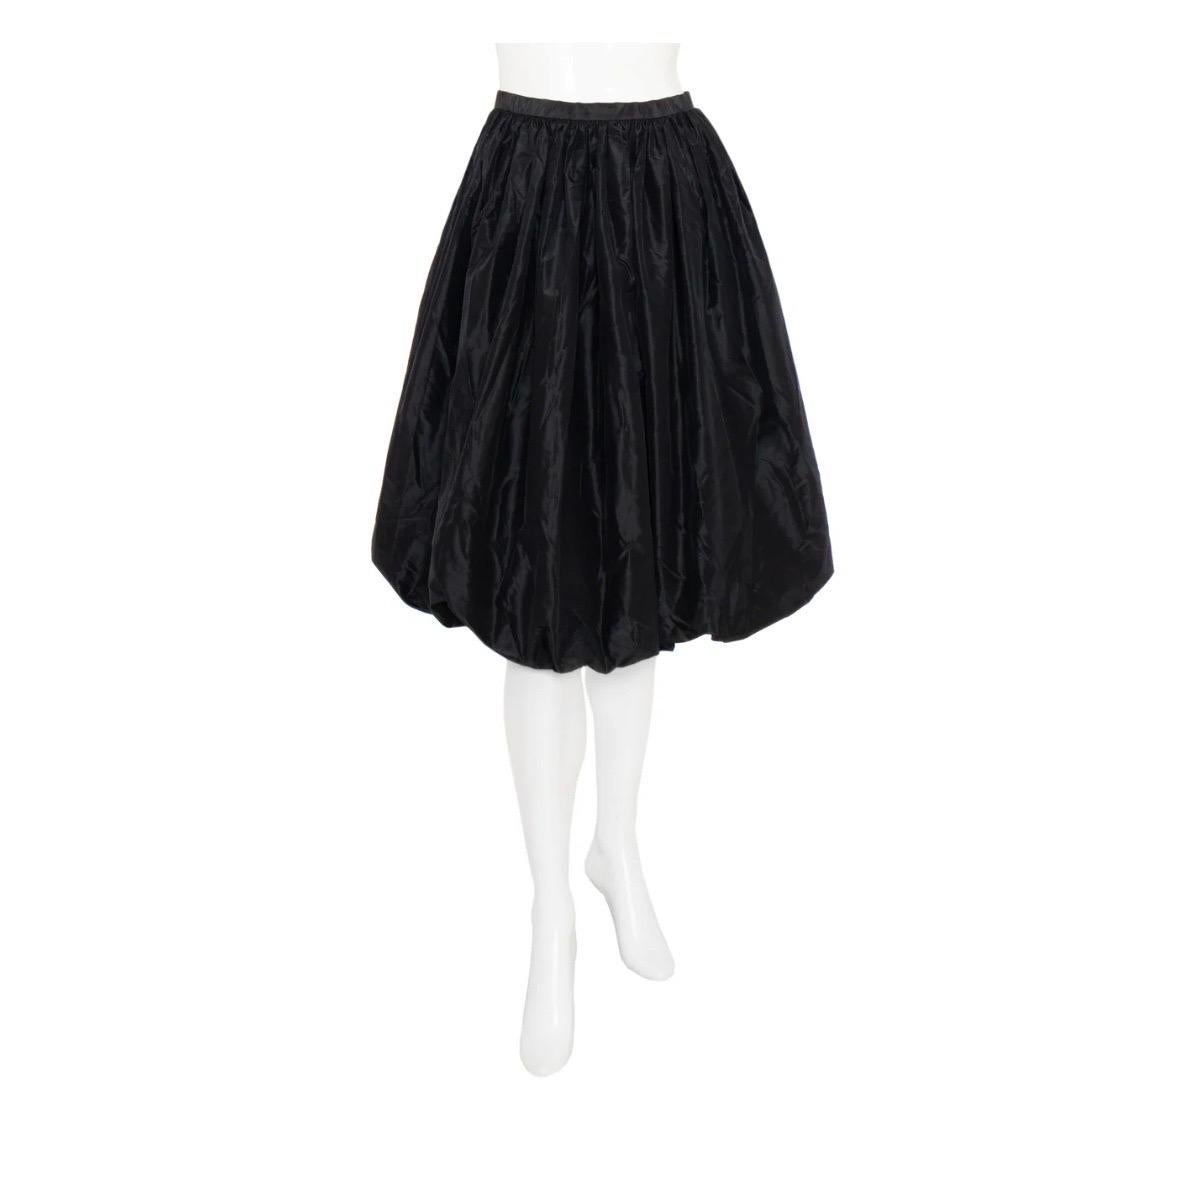 Vintage Bulle bubble skirt by Vicky Tiel
Solid Black
Banded waist
Back zipper closure with hook and eye
Made in France
Composition: 100% silk
Condition: great; no significant signs of wear 
Size/Measurements (approximate/flat):
Vintage Size 10;